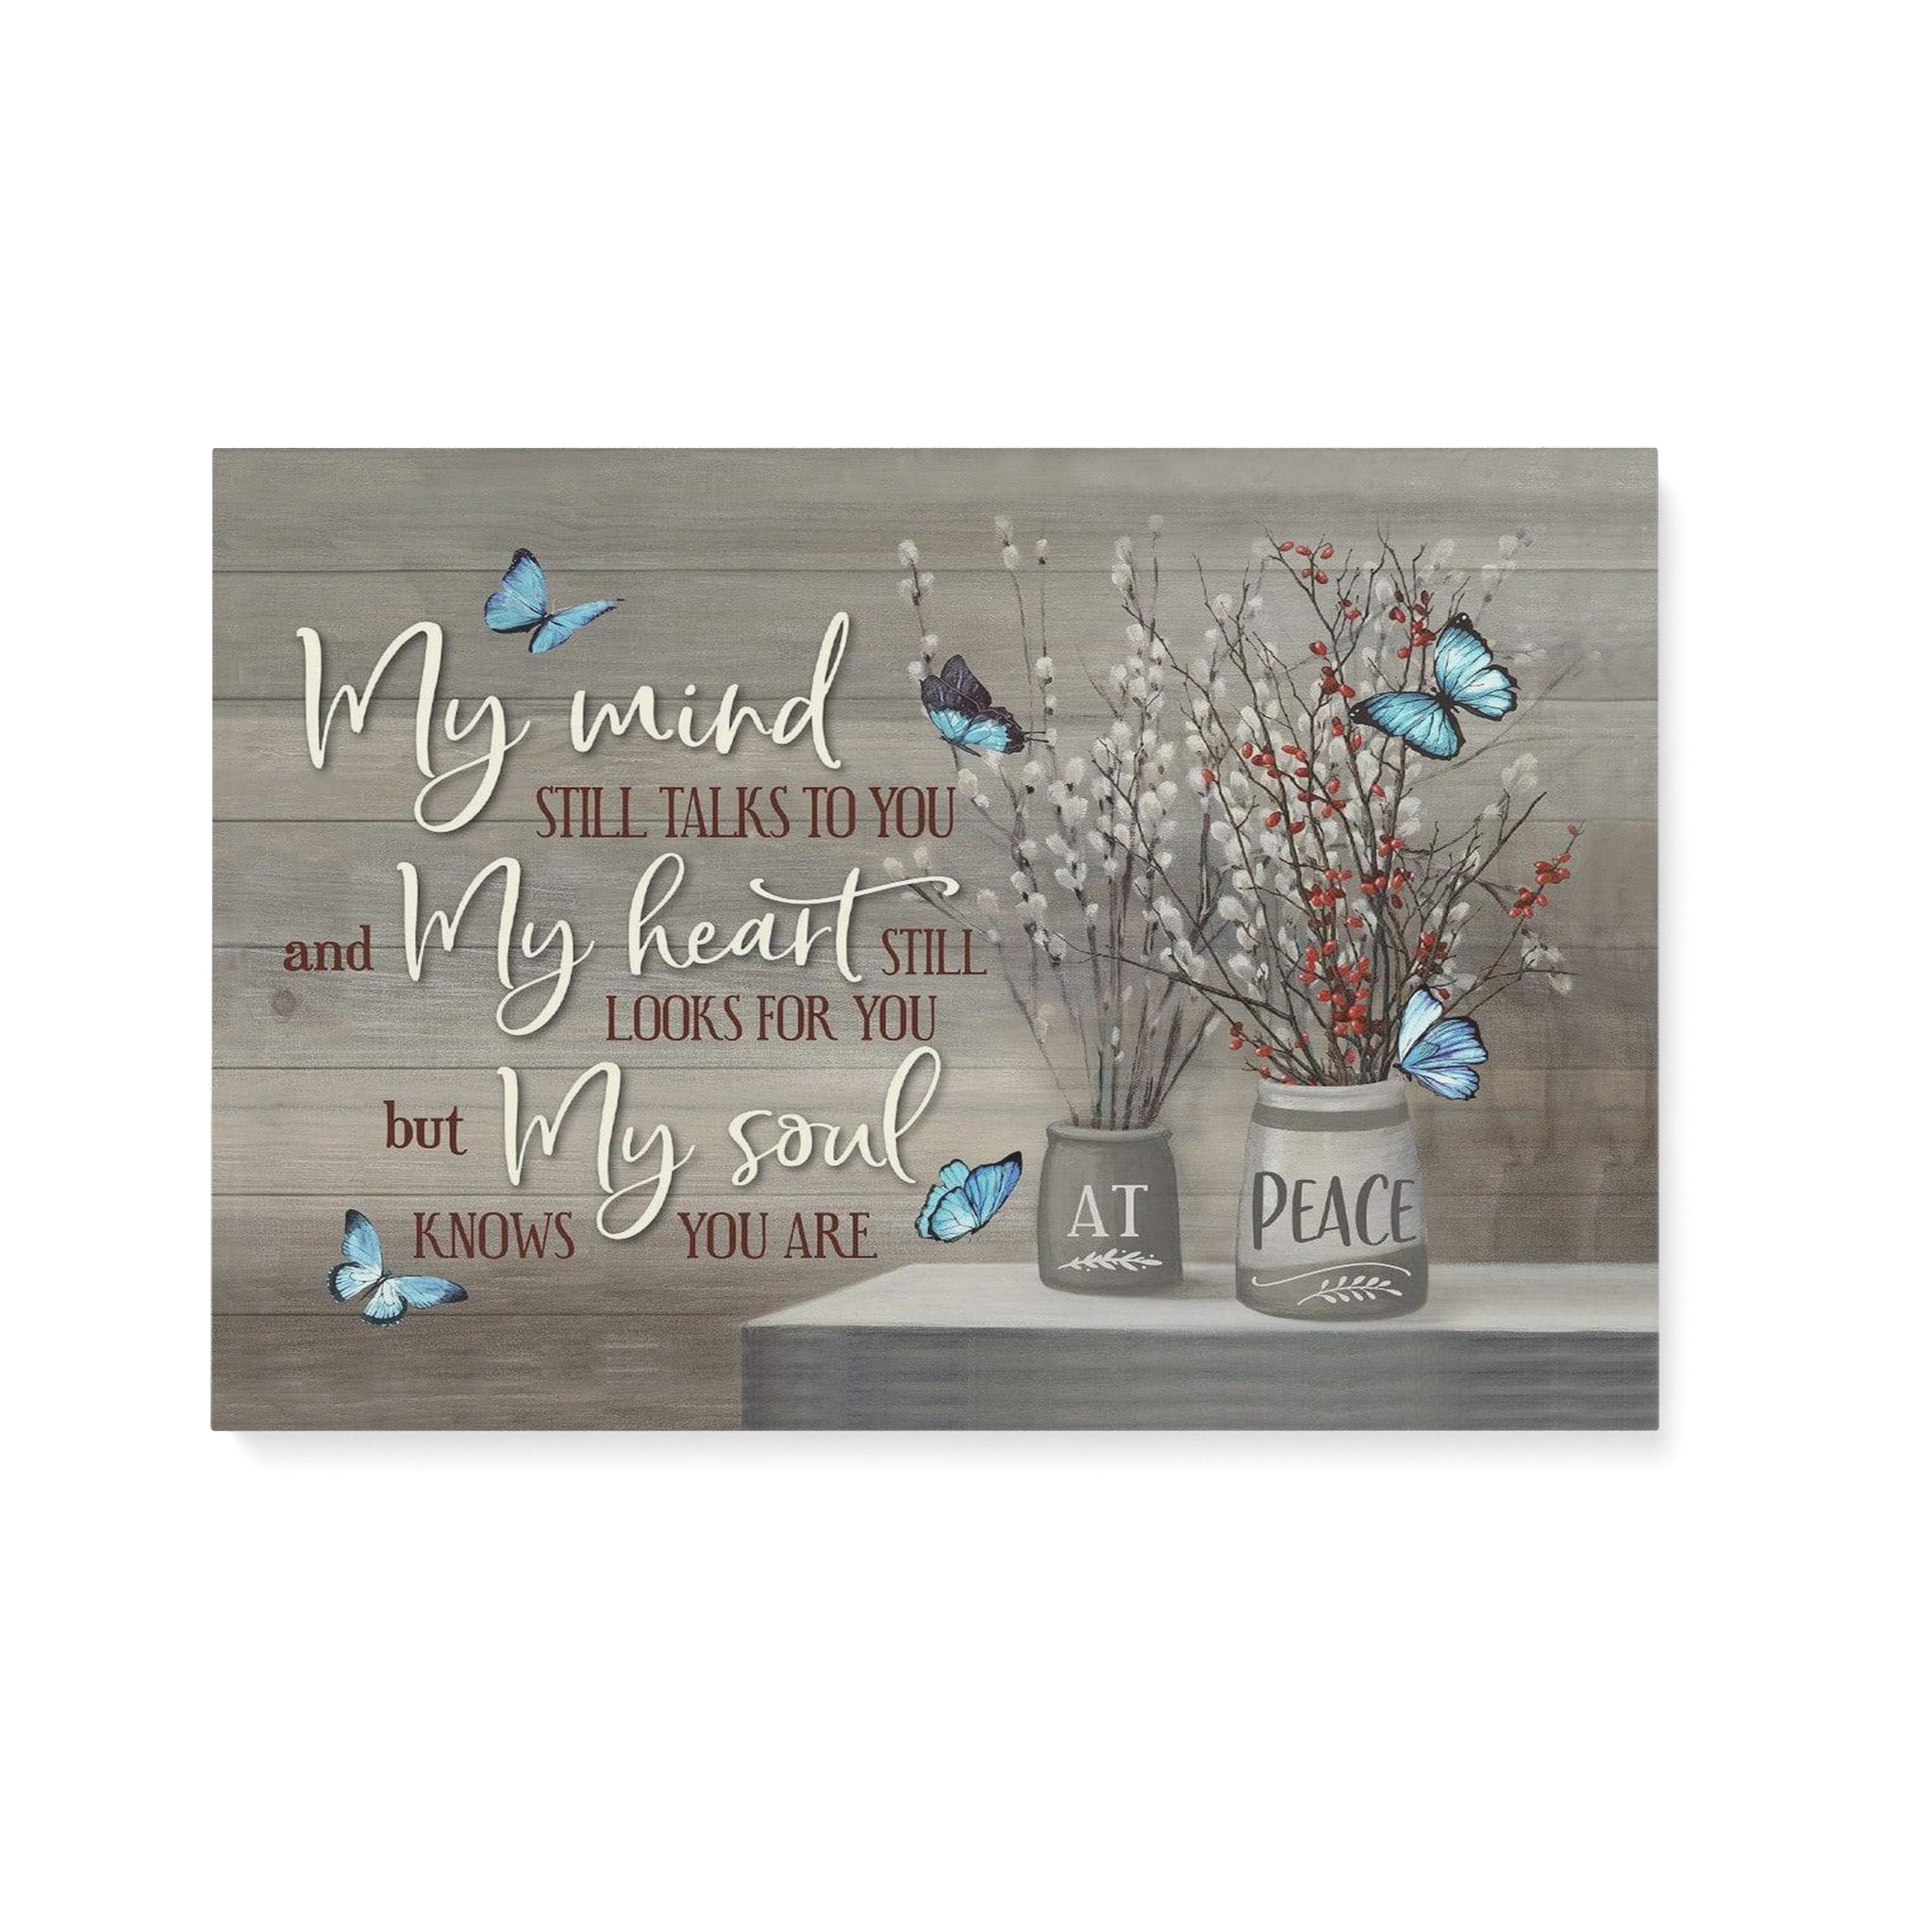 My mind still talks to you Butterfly canvas, unique memorial gift ideas, Home decor wall art NQSD271